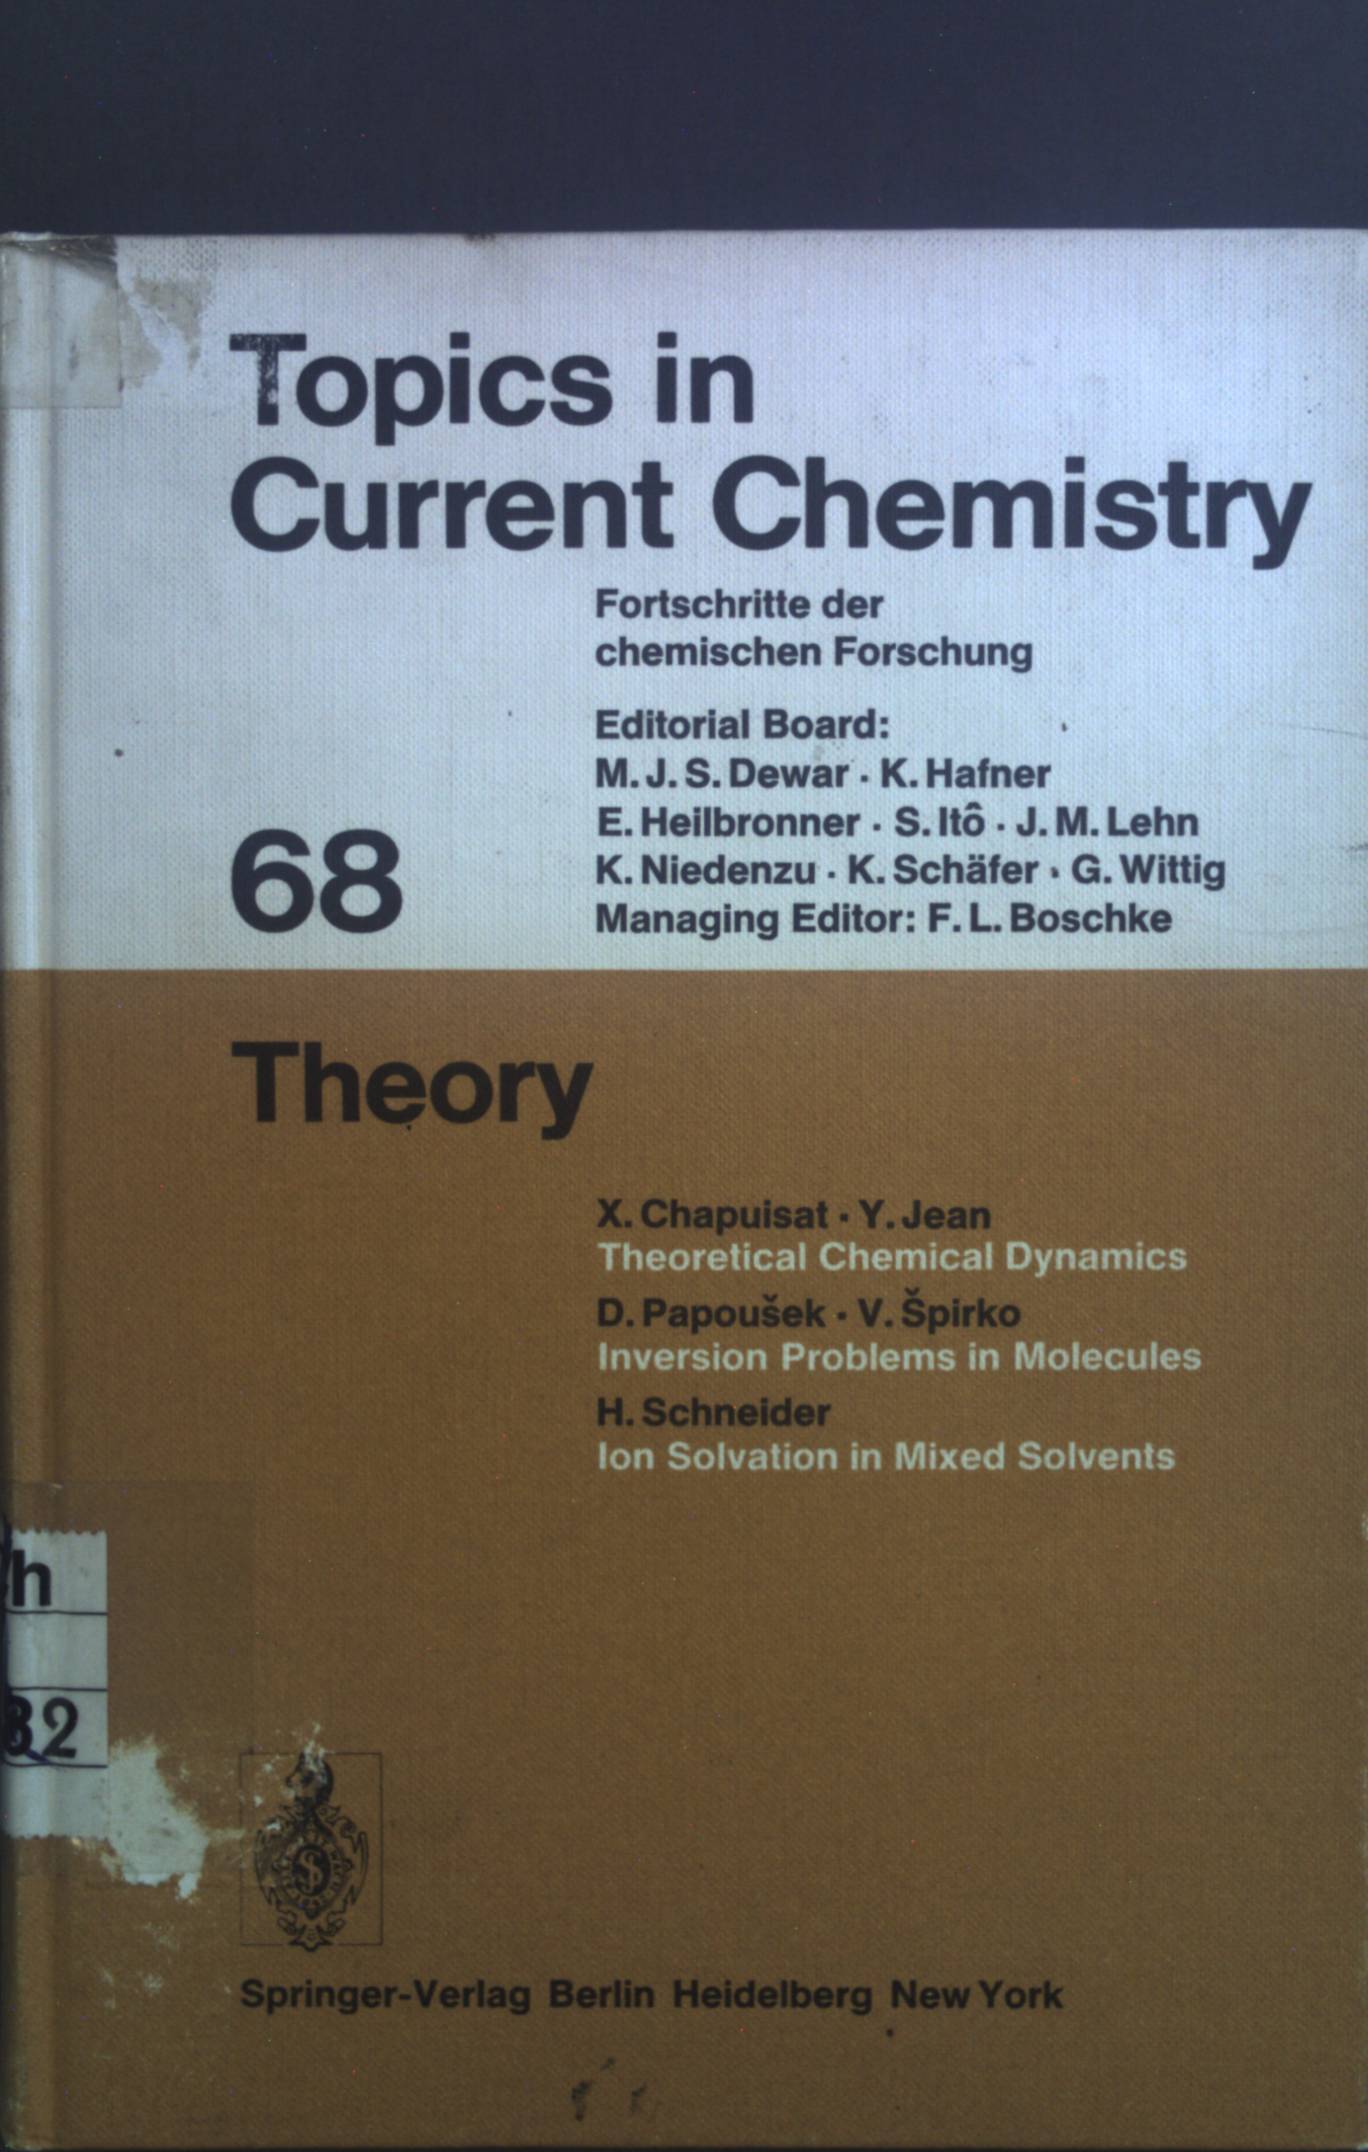 Topics in Current Chemistry, 68: Theory: Theoretical Chemical Dynamics, Inversion Problems in Molecules, Ion Solvation in Mixed Solvents. - Chapuisat, X., Y. Jean D. Papusek a. o.